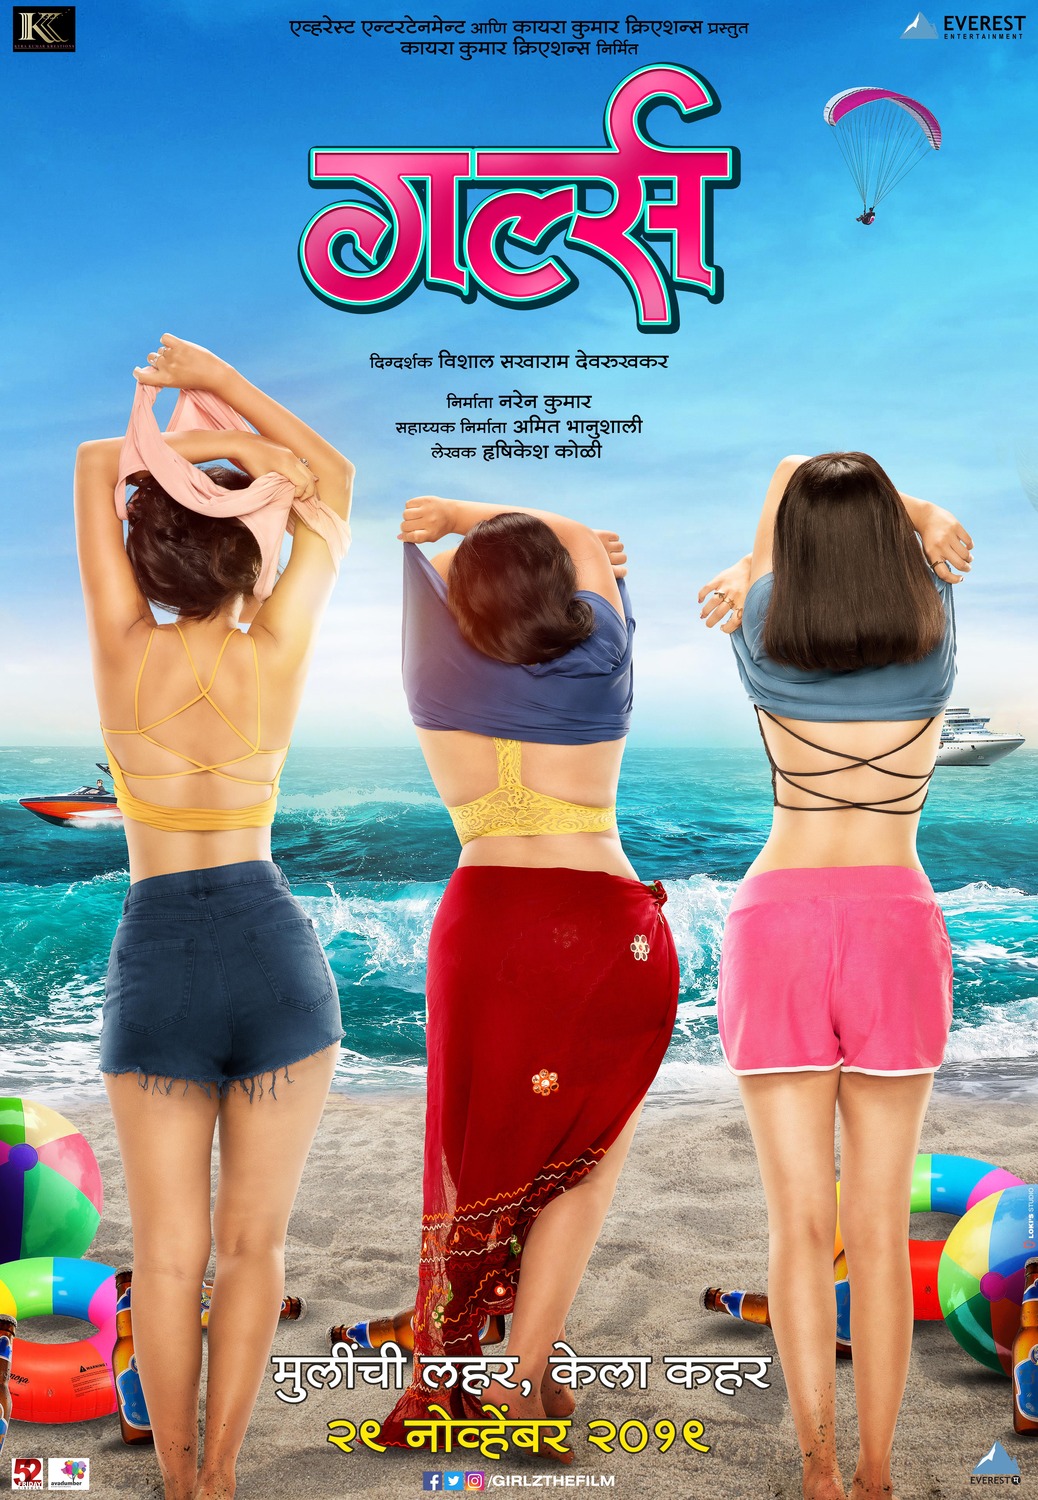 Extra Large Movie Poster Image for Girlz (#1 of 8)